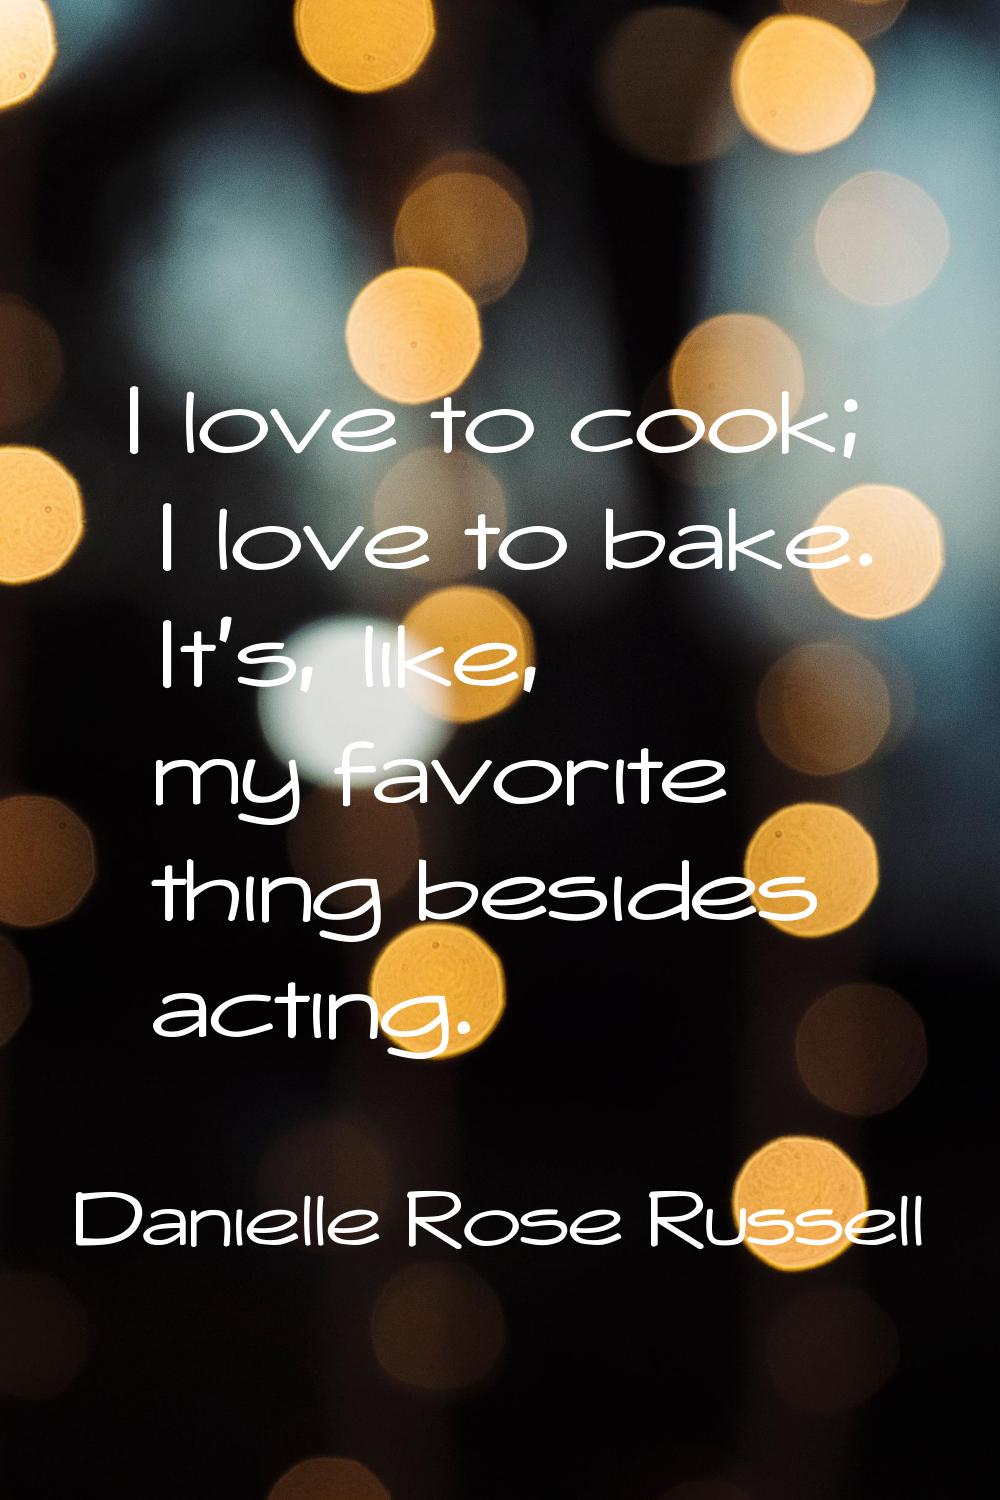 I love to cook; I love to bake. It's, like, my favorite thing besides acting.